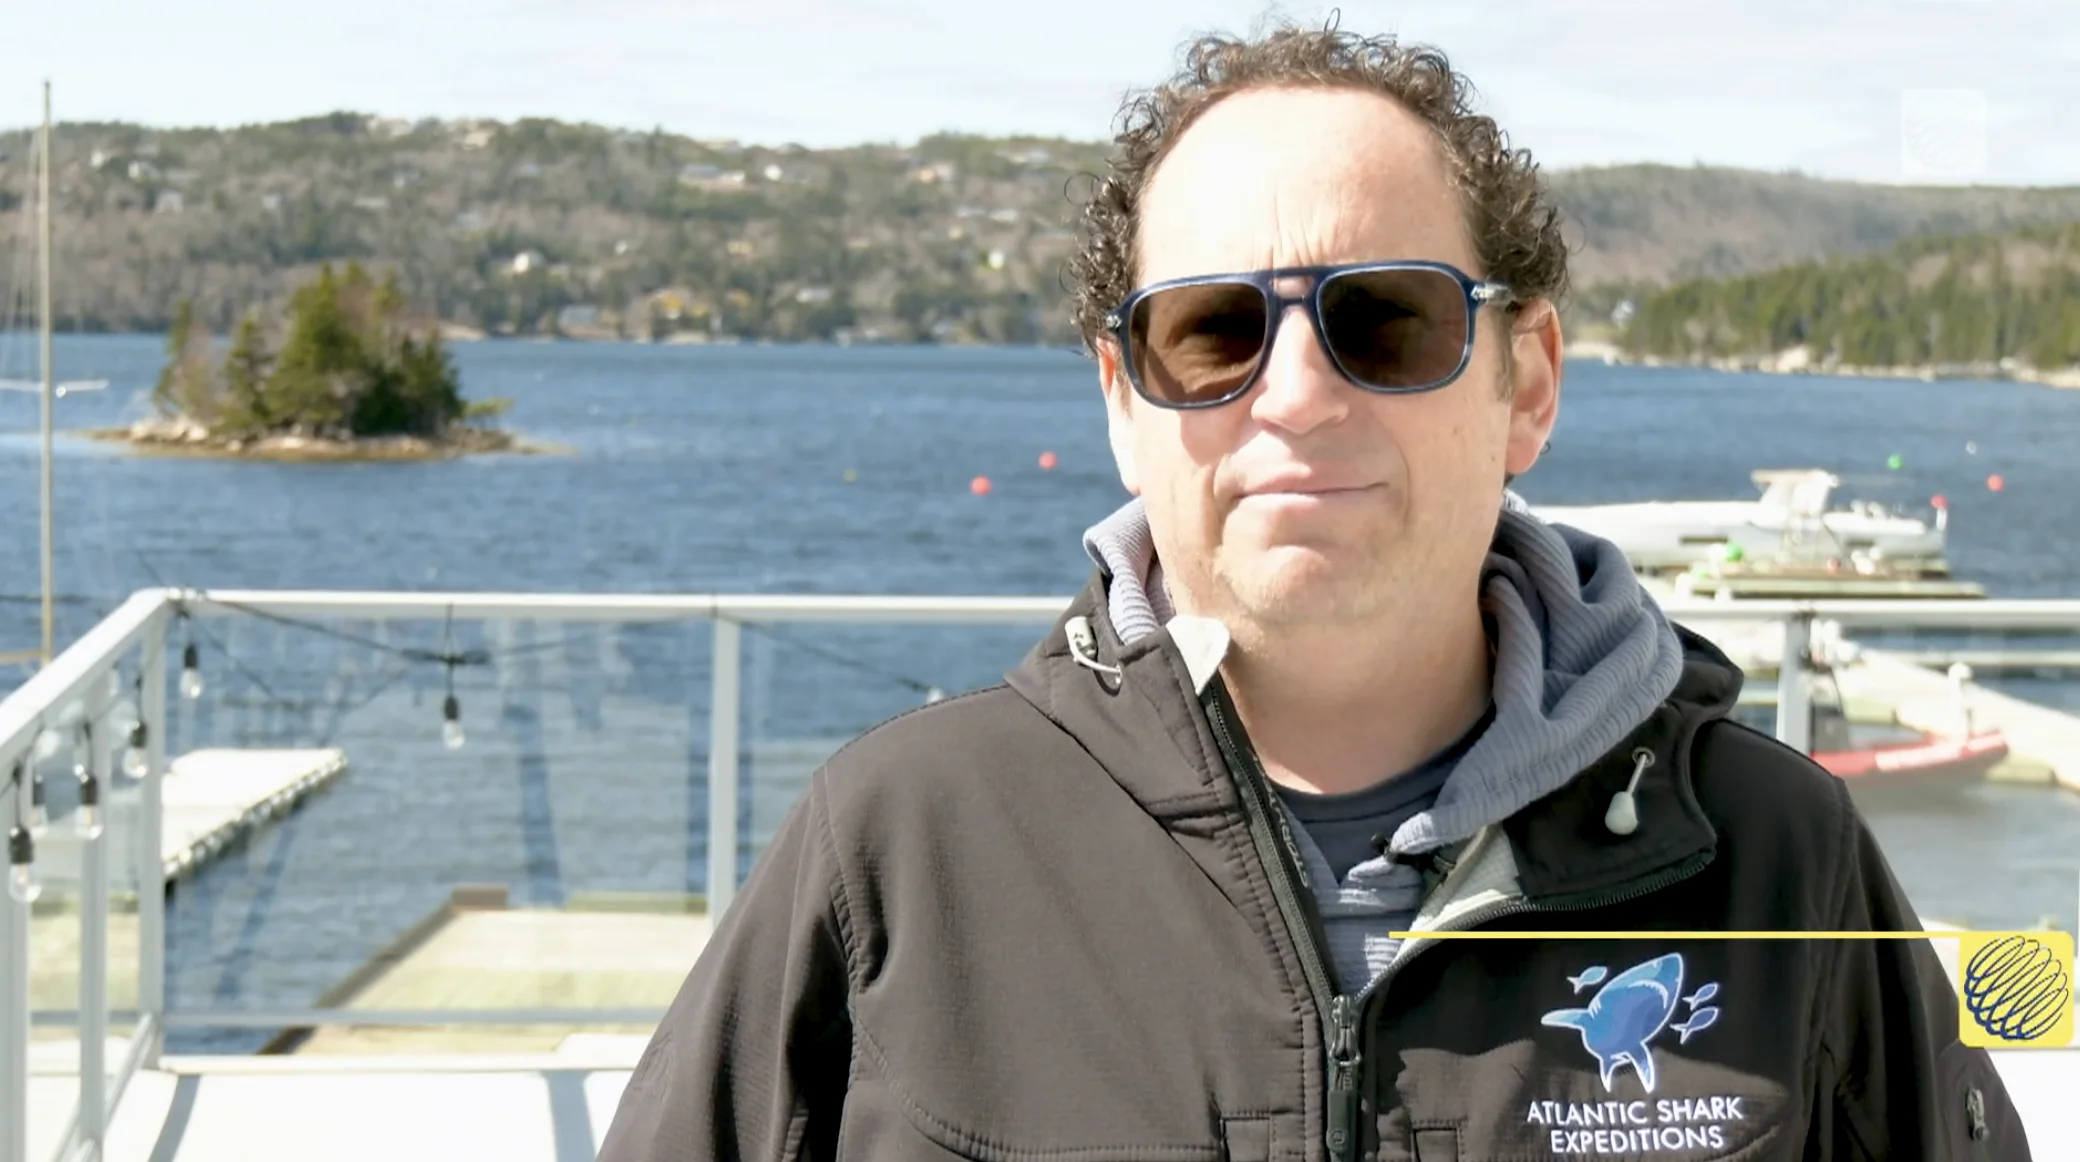 TWN: Dr. Neil Hammerschlag is a marine ecologist and shark researcher based out of Nova Scotia, Canada.